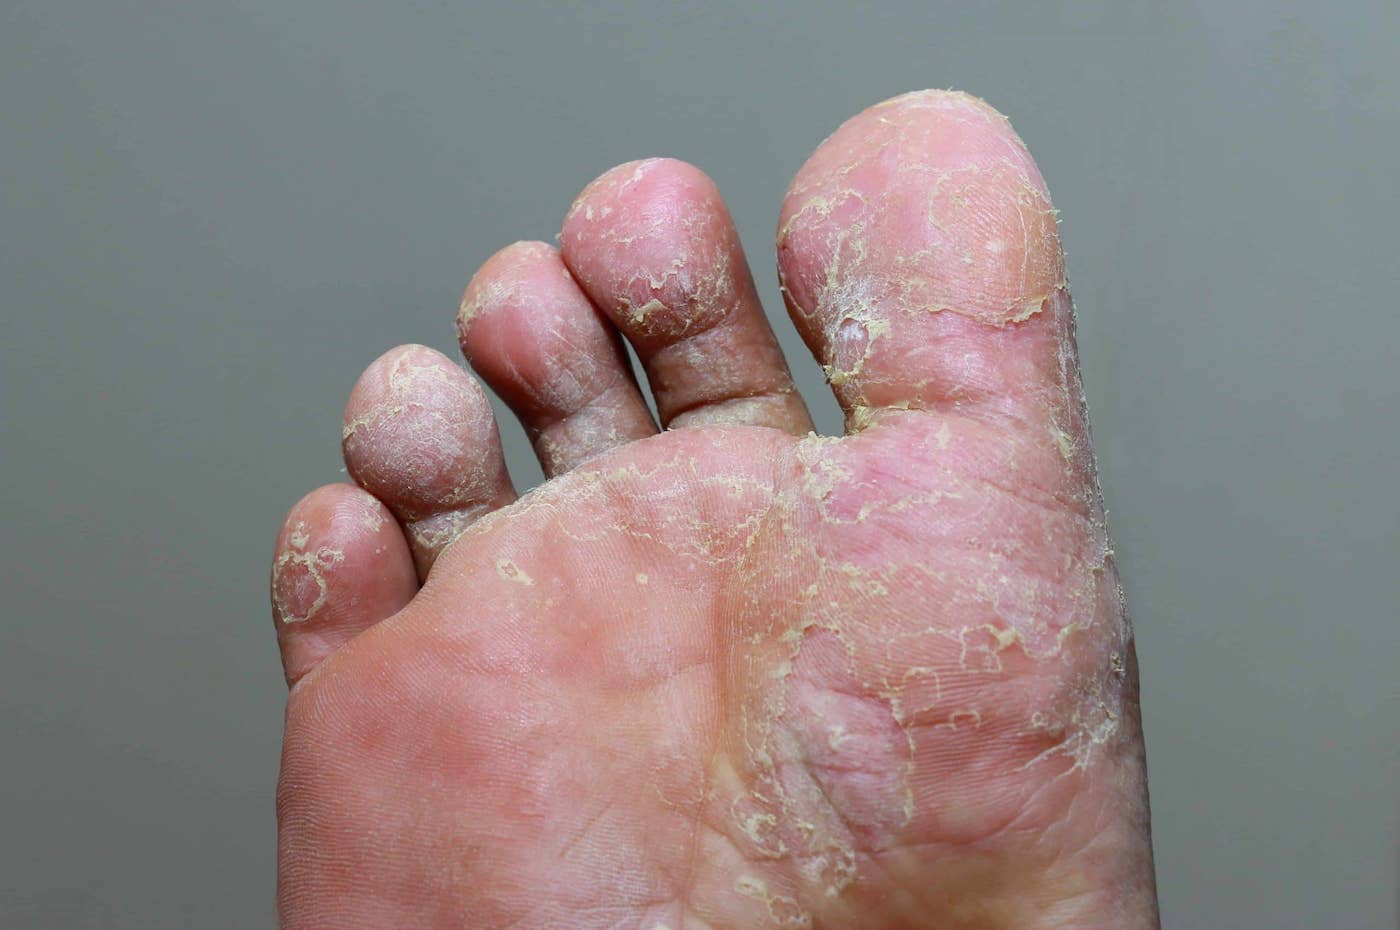 Signs of Disease Your Feet Can Reveal